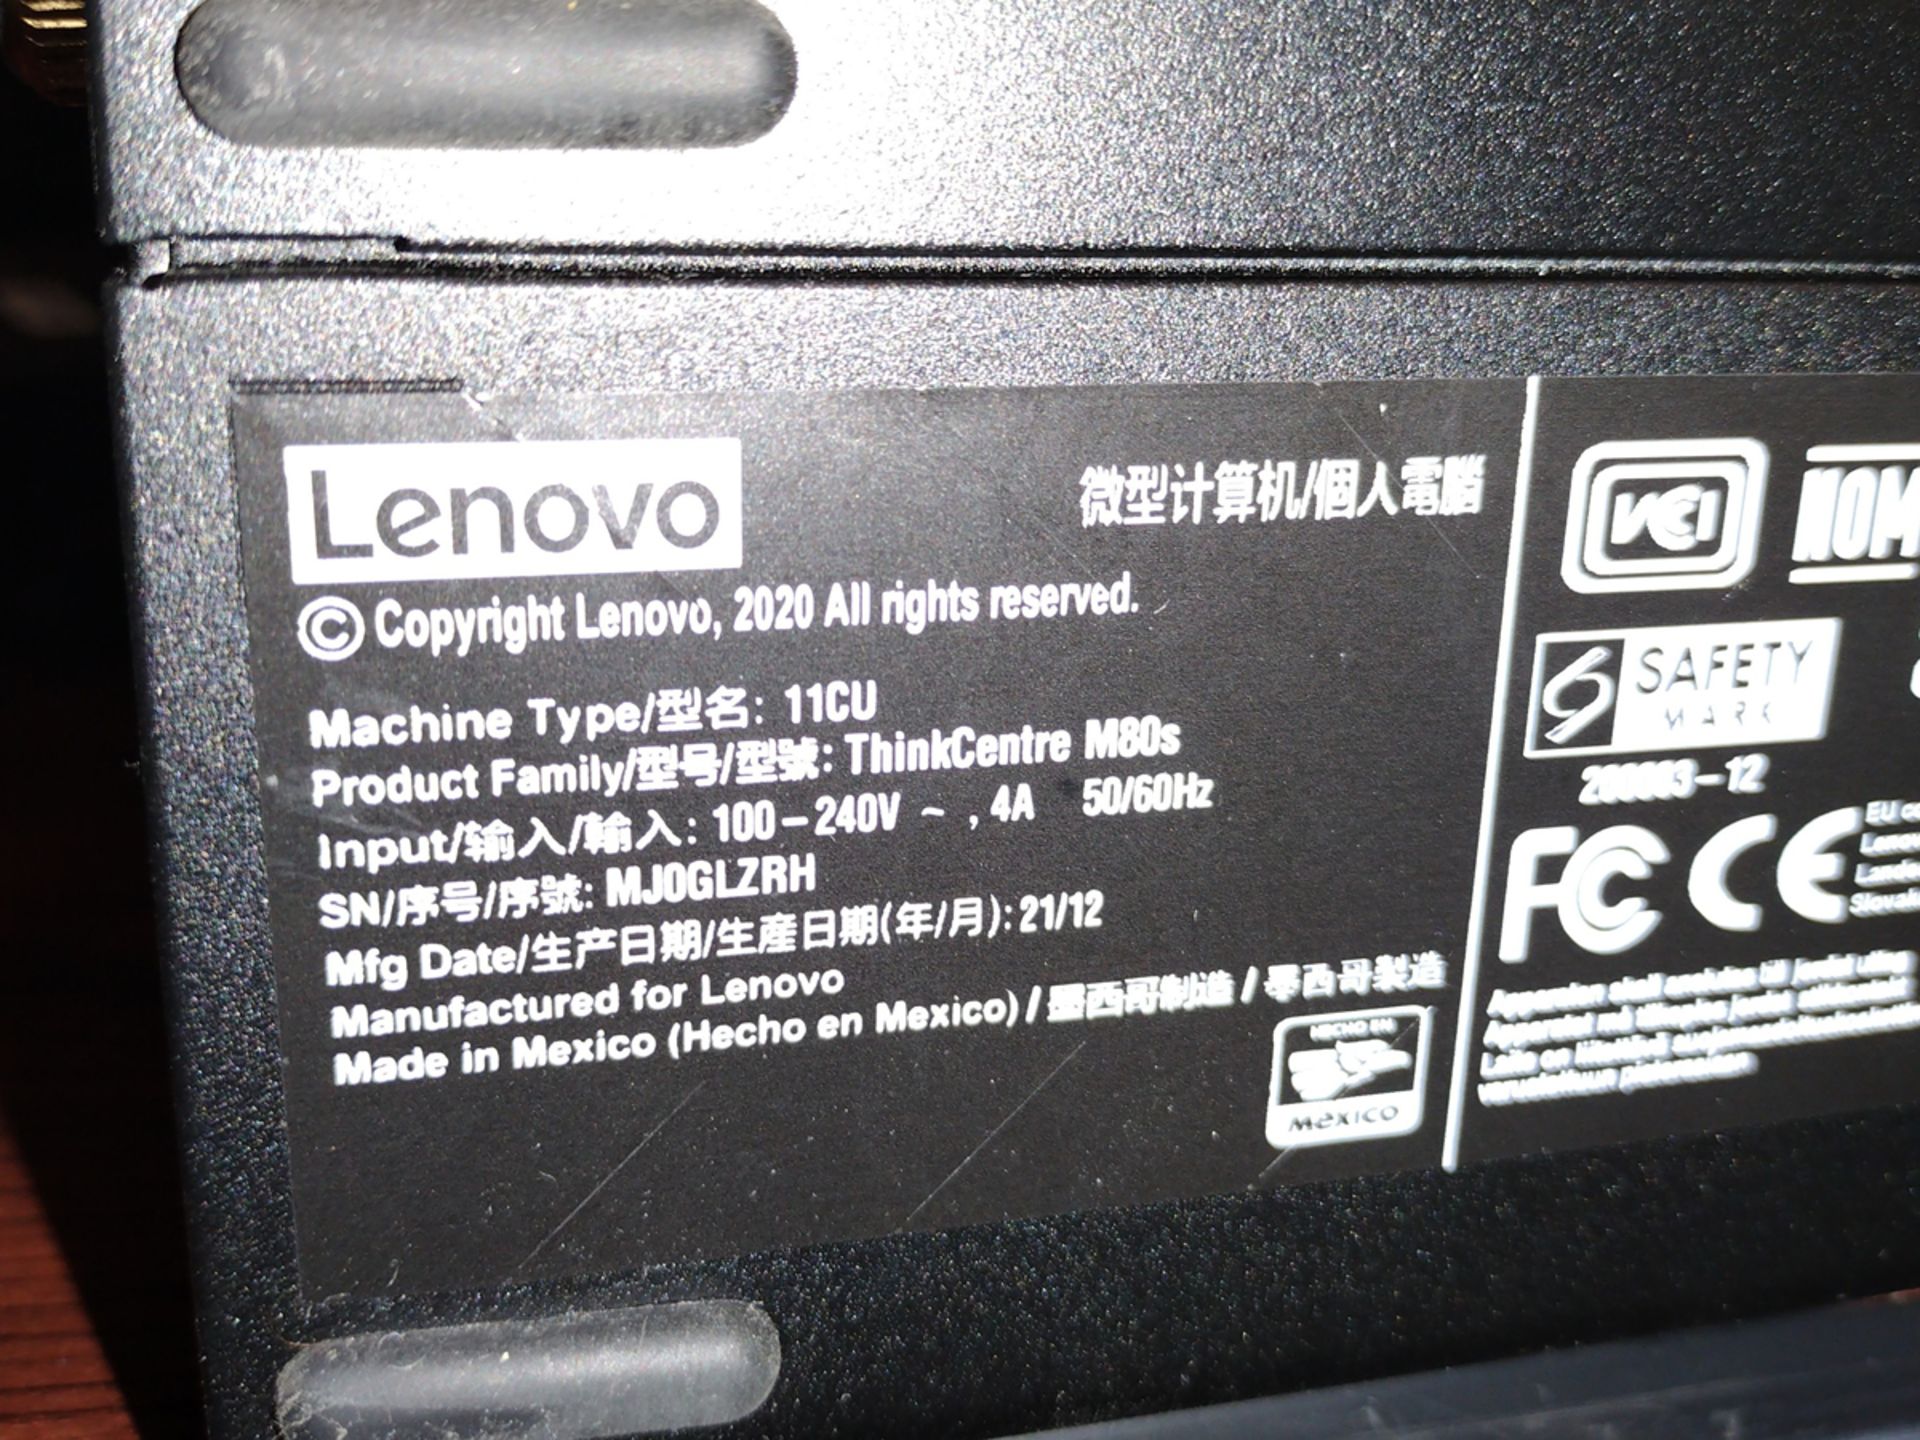 Lenovo M80S ThinkCentre i5 PC w/ Monitor and Keyboard - Image 2 of 2